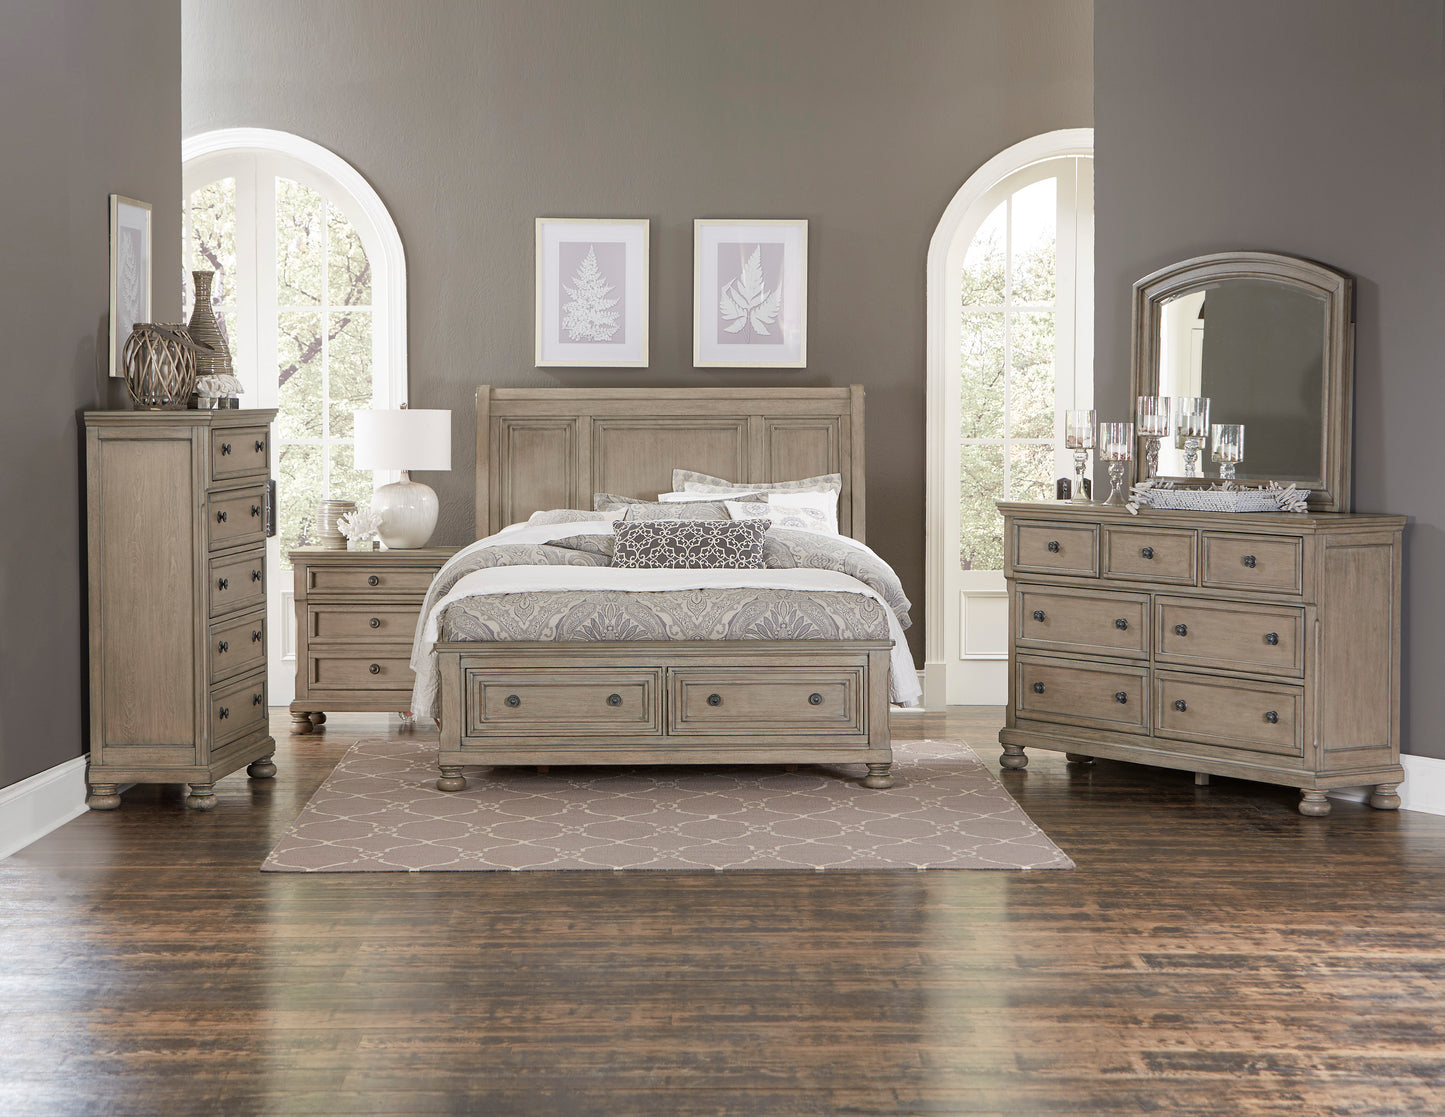 Broville Rustic 5PC Bedroom Set E King Sleigh Storage Bed, Dresser, Mirror, 2 Nightstand in Weathered Wood